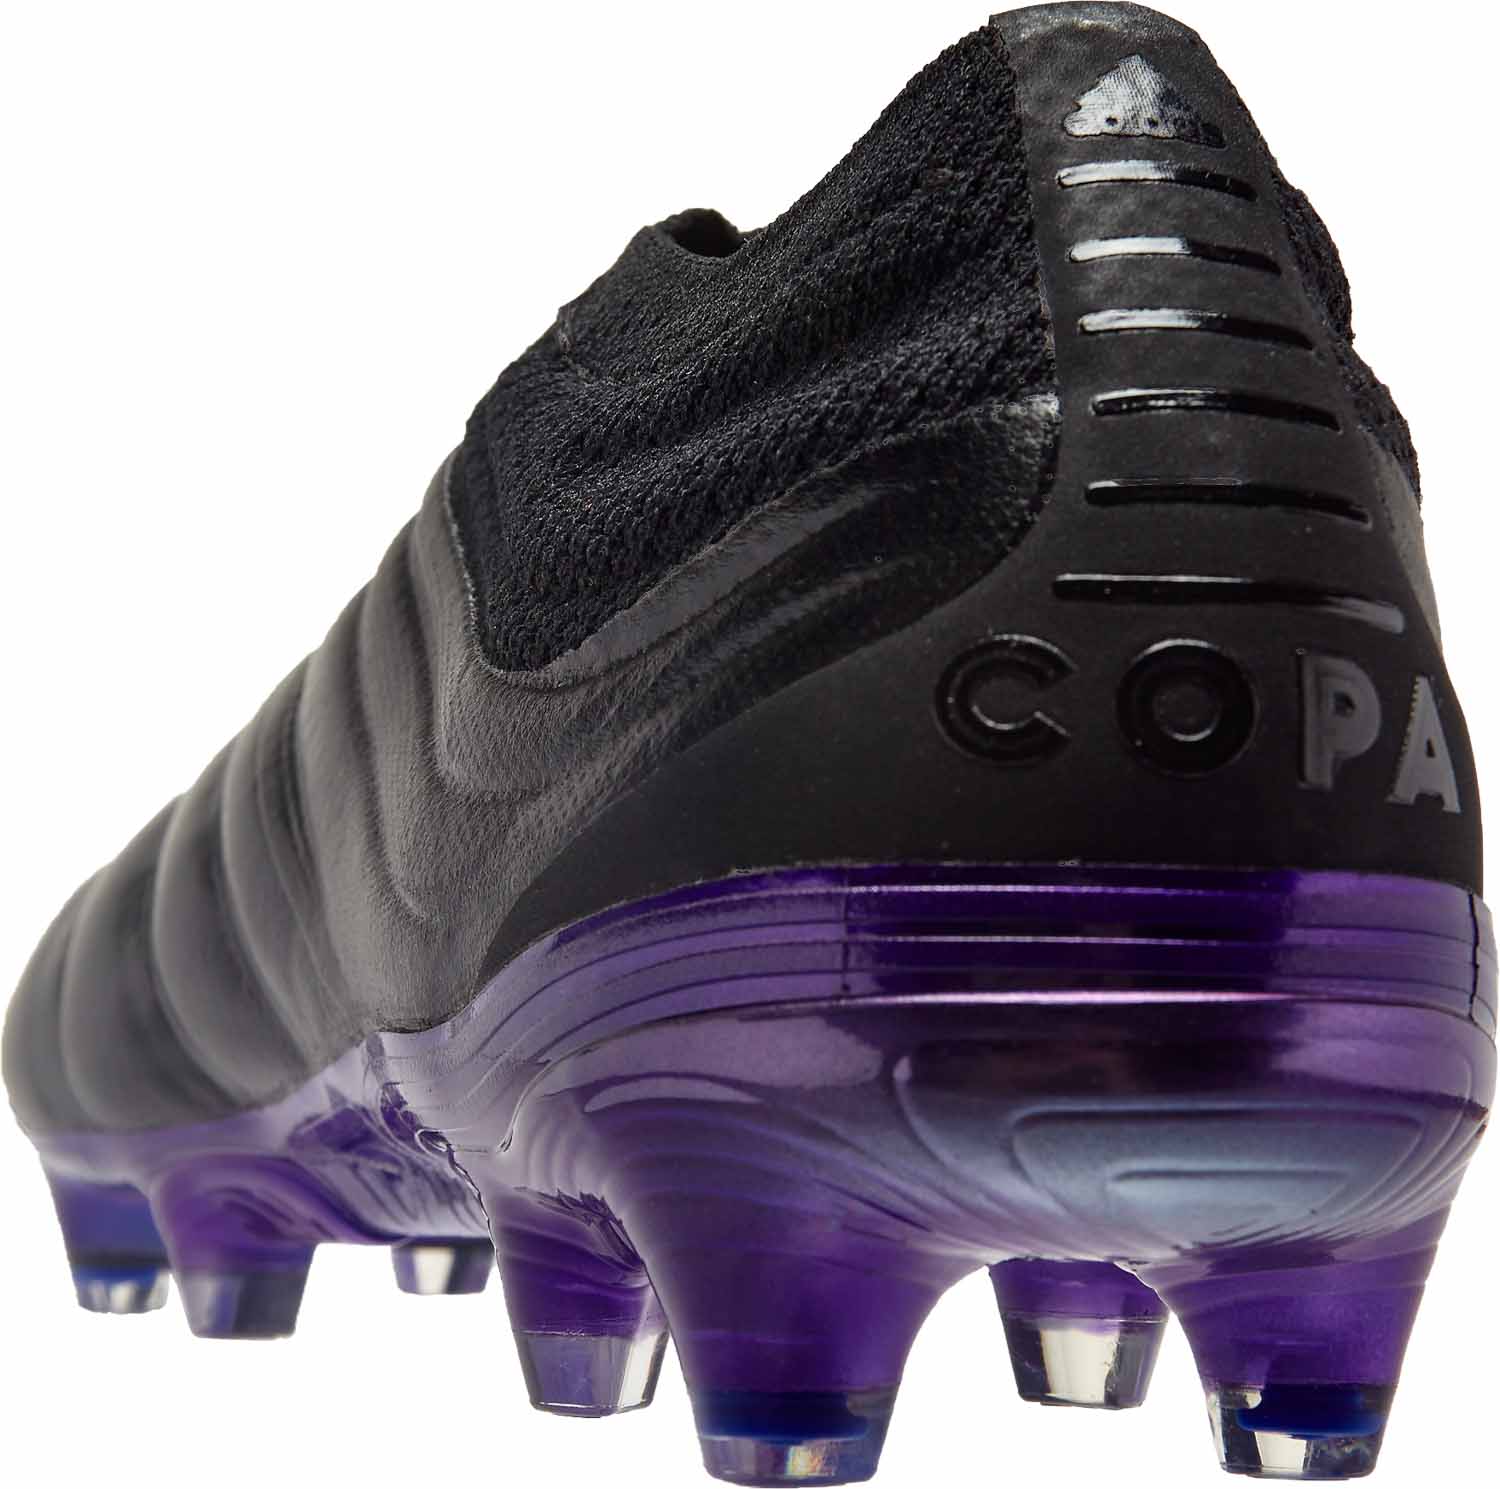 FG F35514 K-Leather Limited Edition Core Black Soccer Cleats Details about   adida Copa 19 